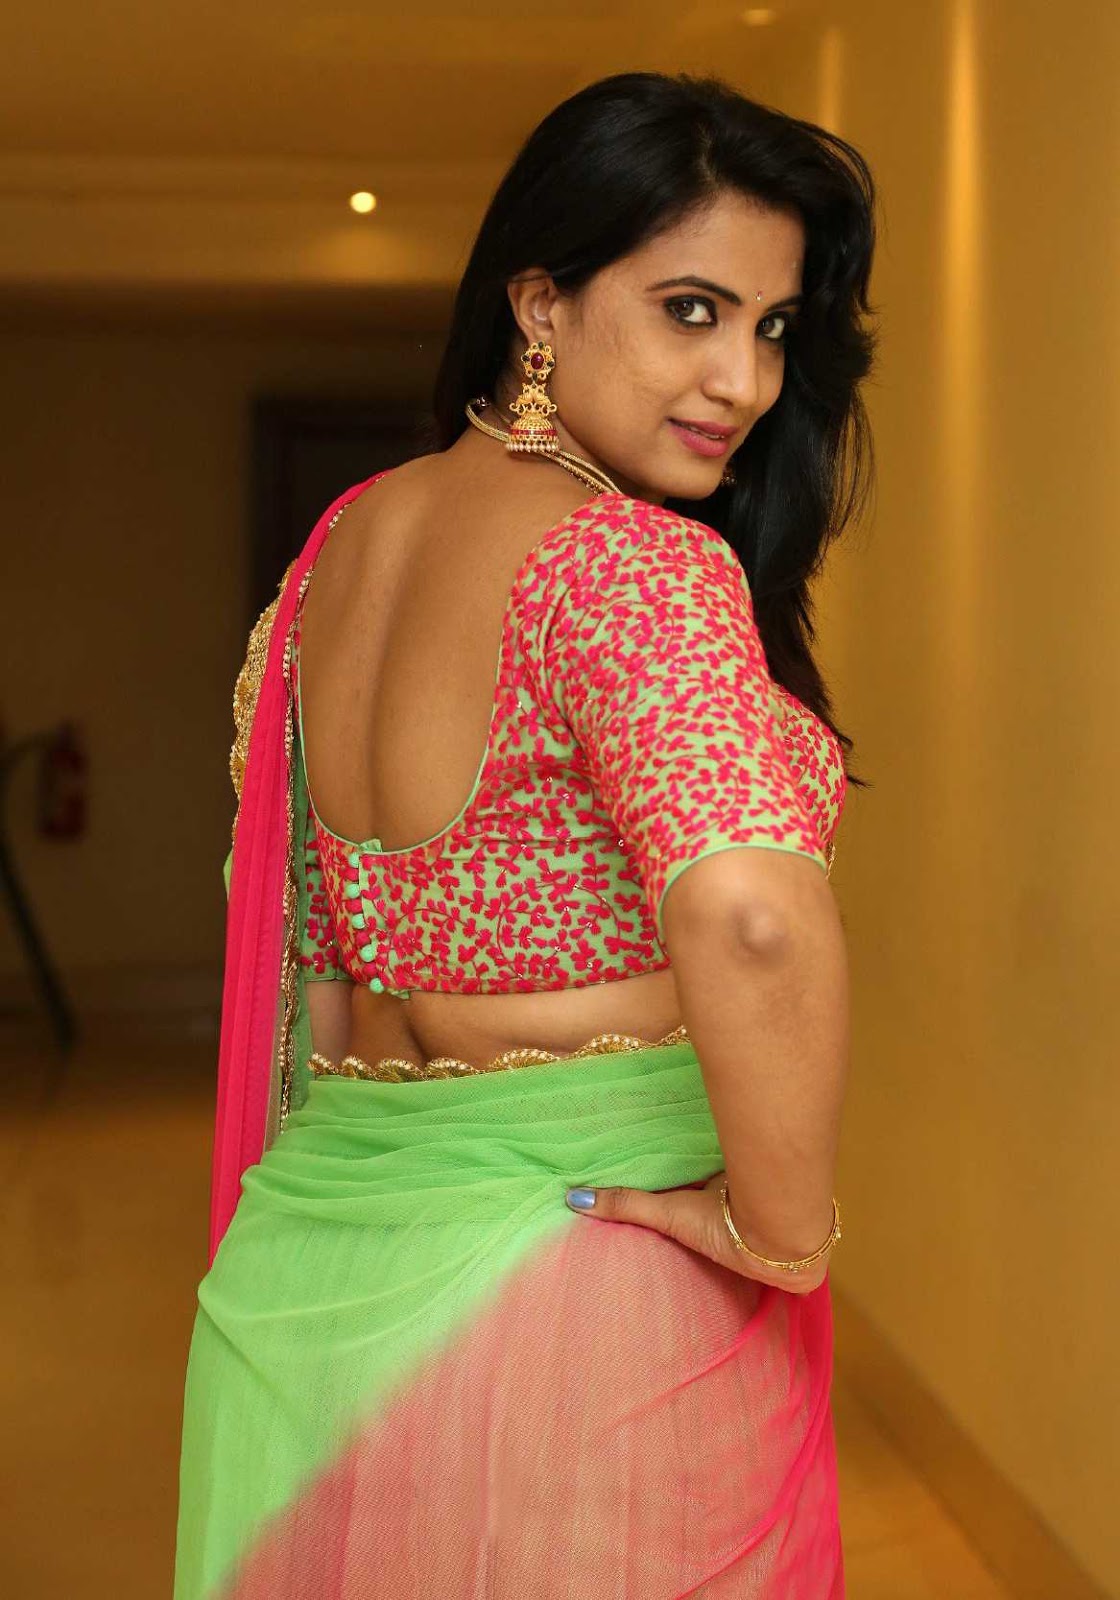 Tollywood Actress Triveni Rao Latest Hot Images In Saree Gallery.